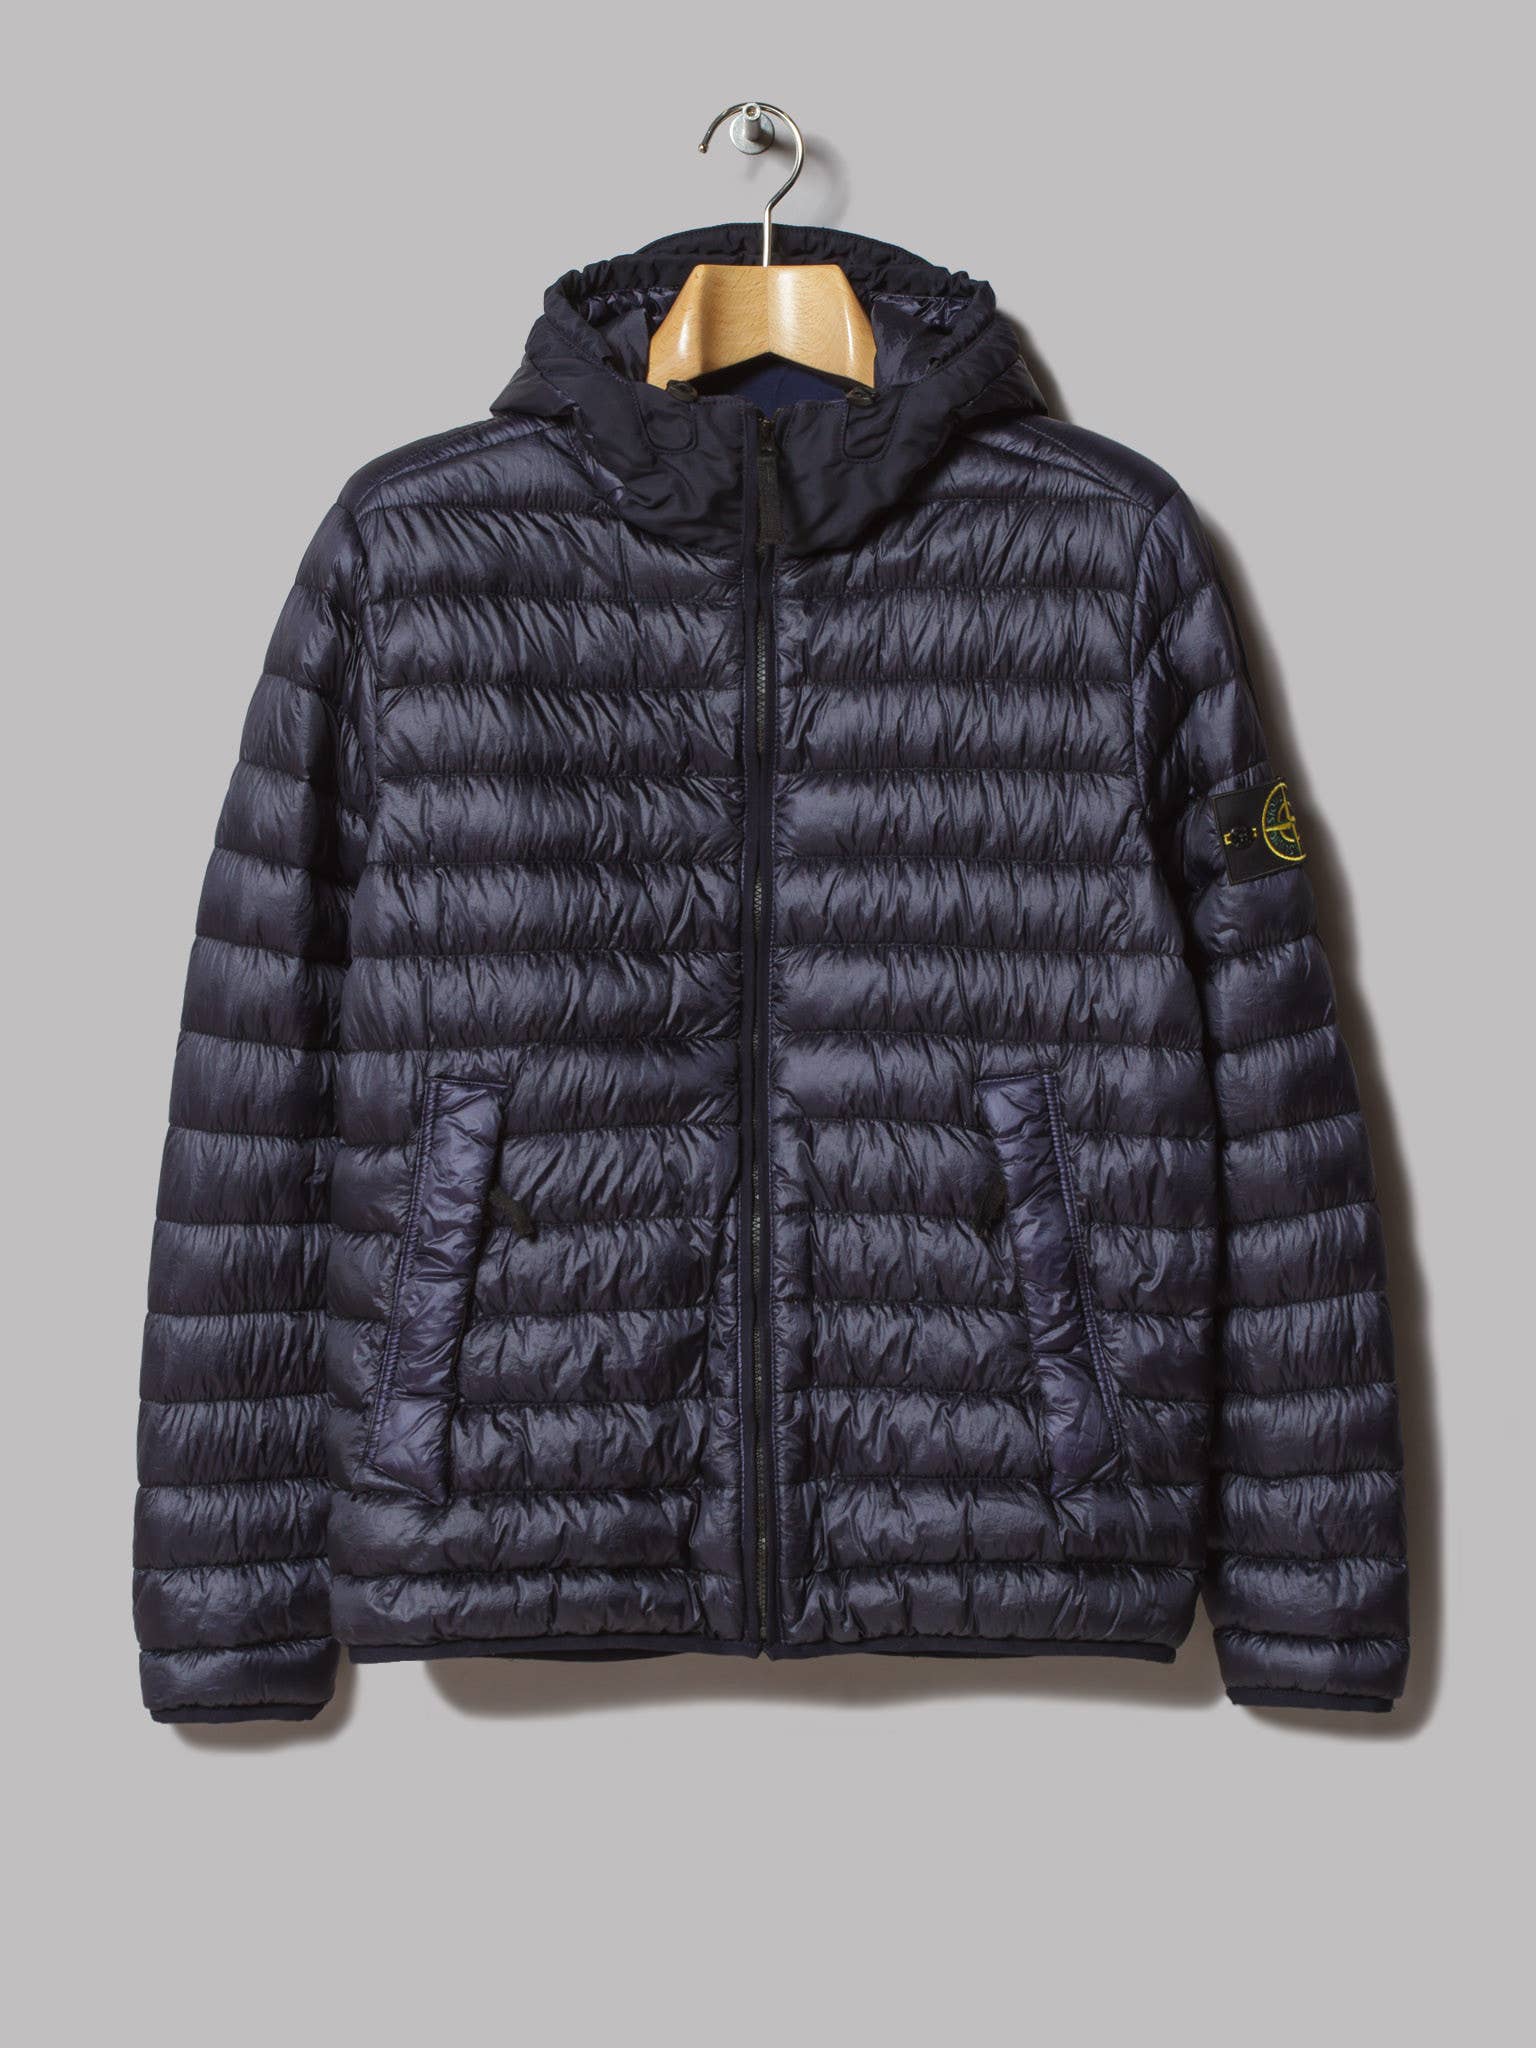 Stone Island Reminds You Of How Dope Ducks Are | Complex